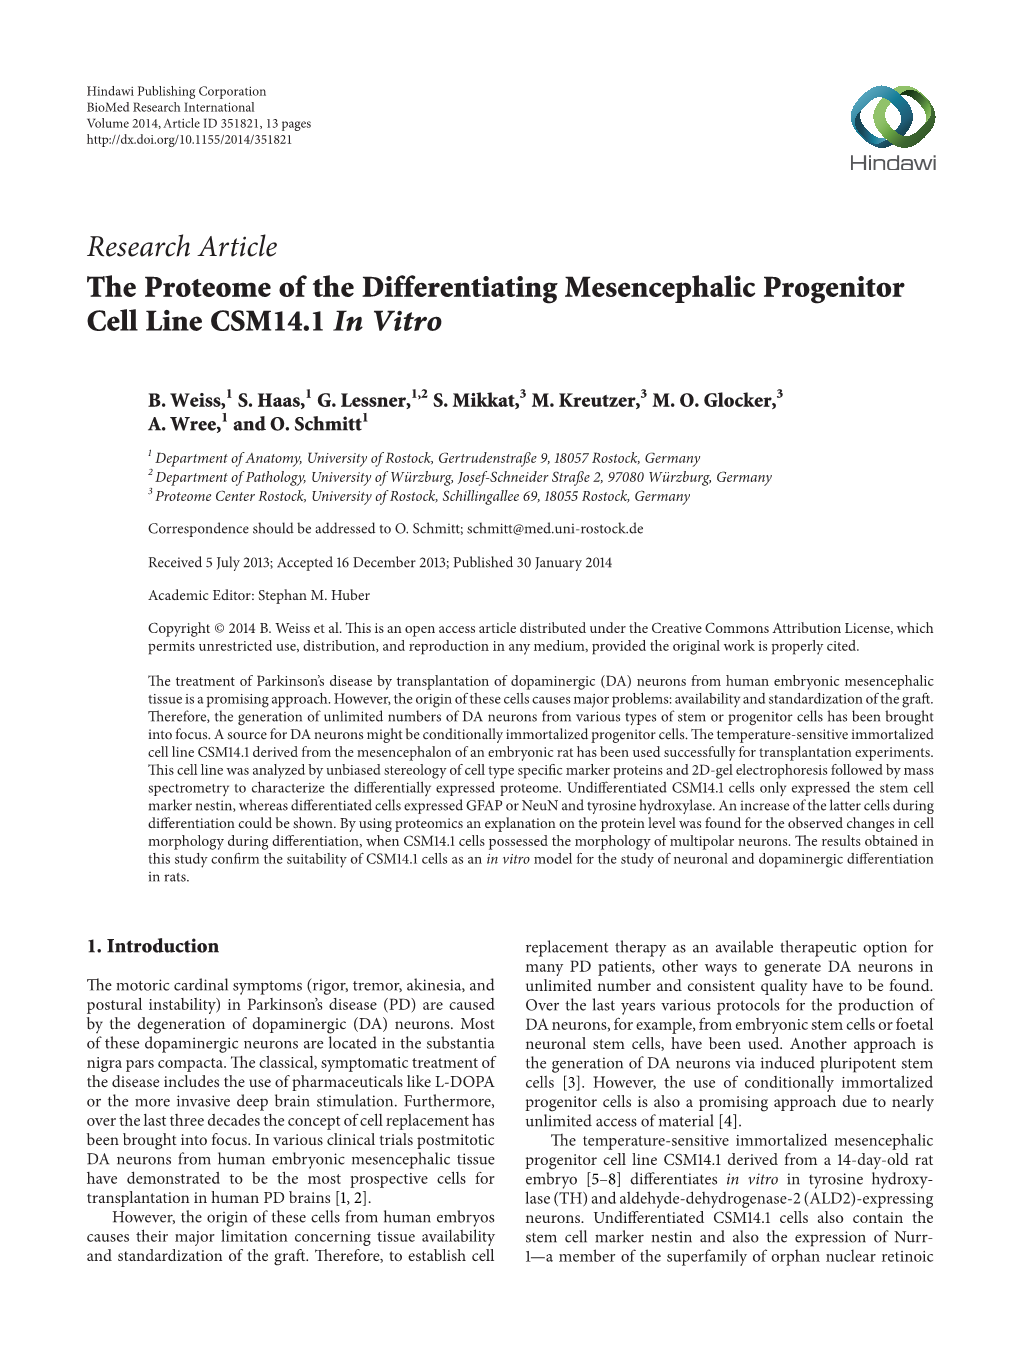 The Proteome of the Differentiating Mesencephalic Progenitor Cell Line CSM14.1 in Vitro